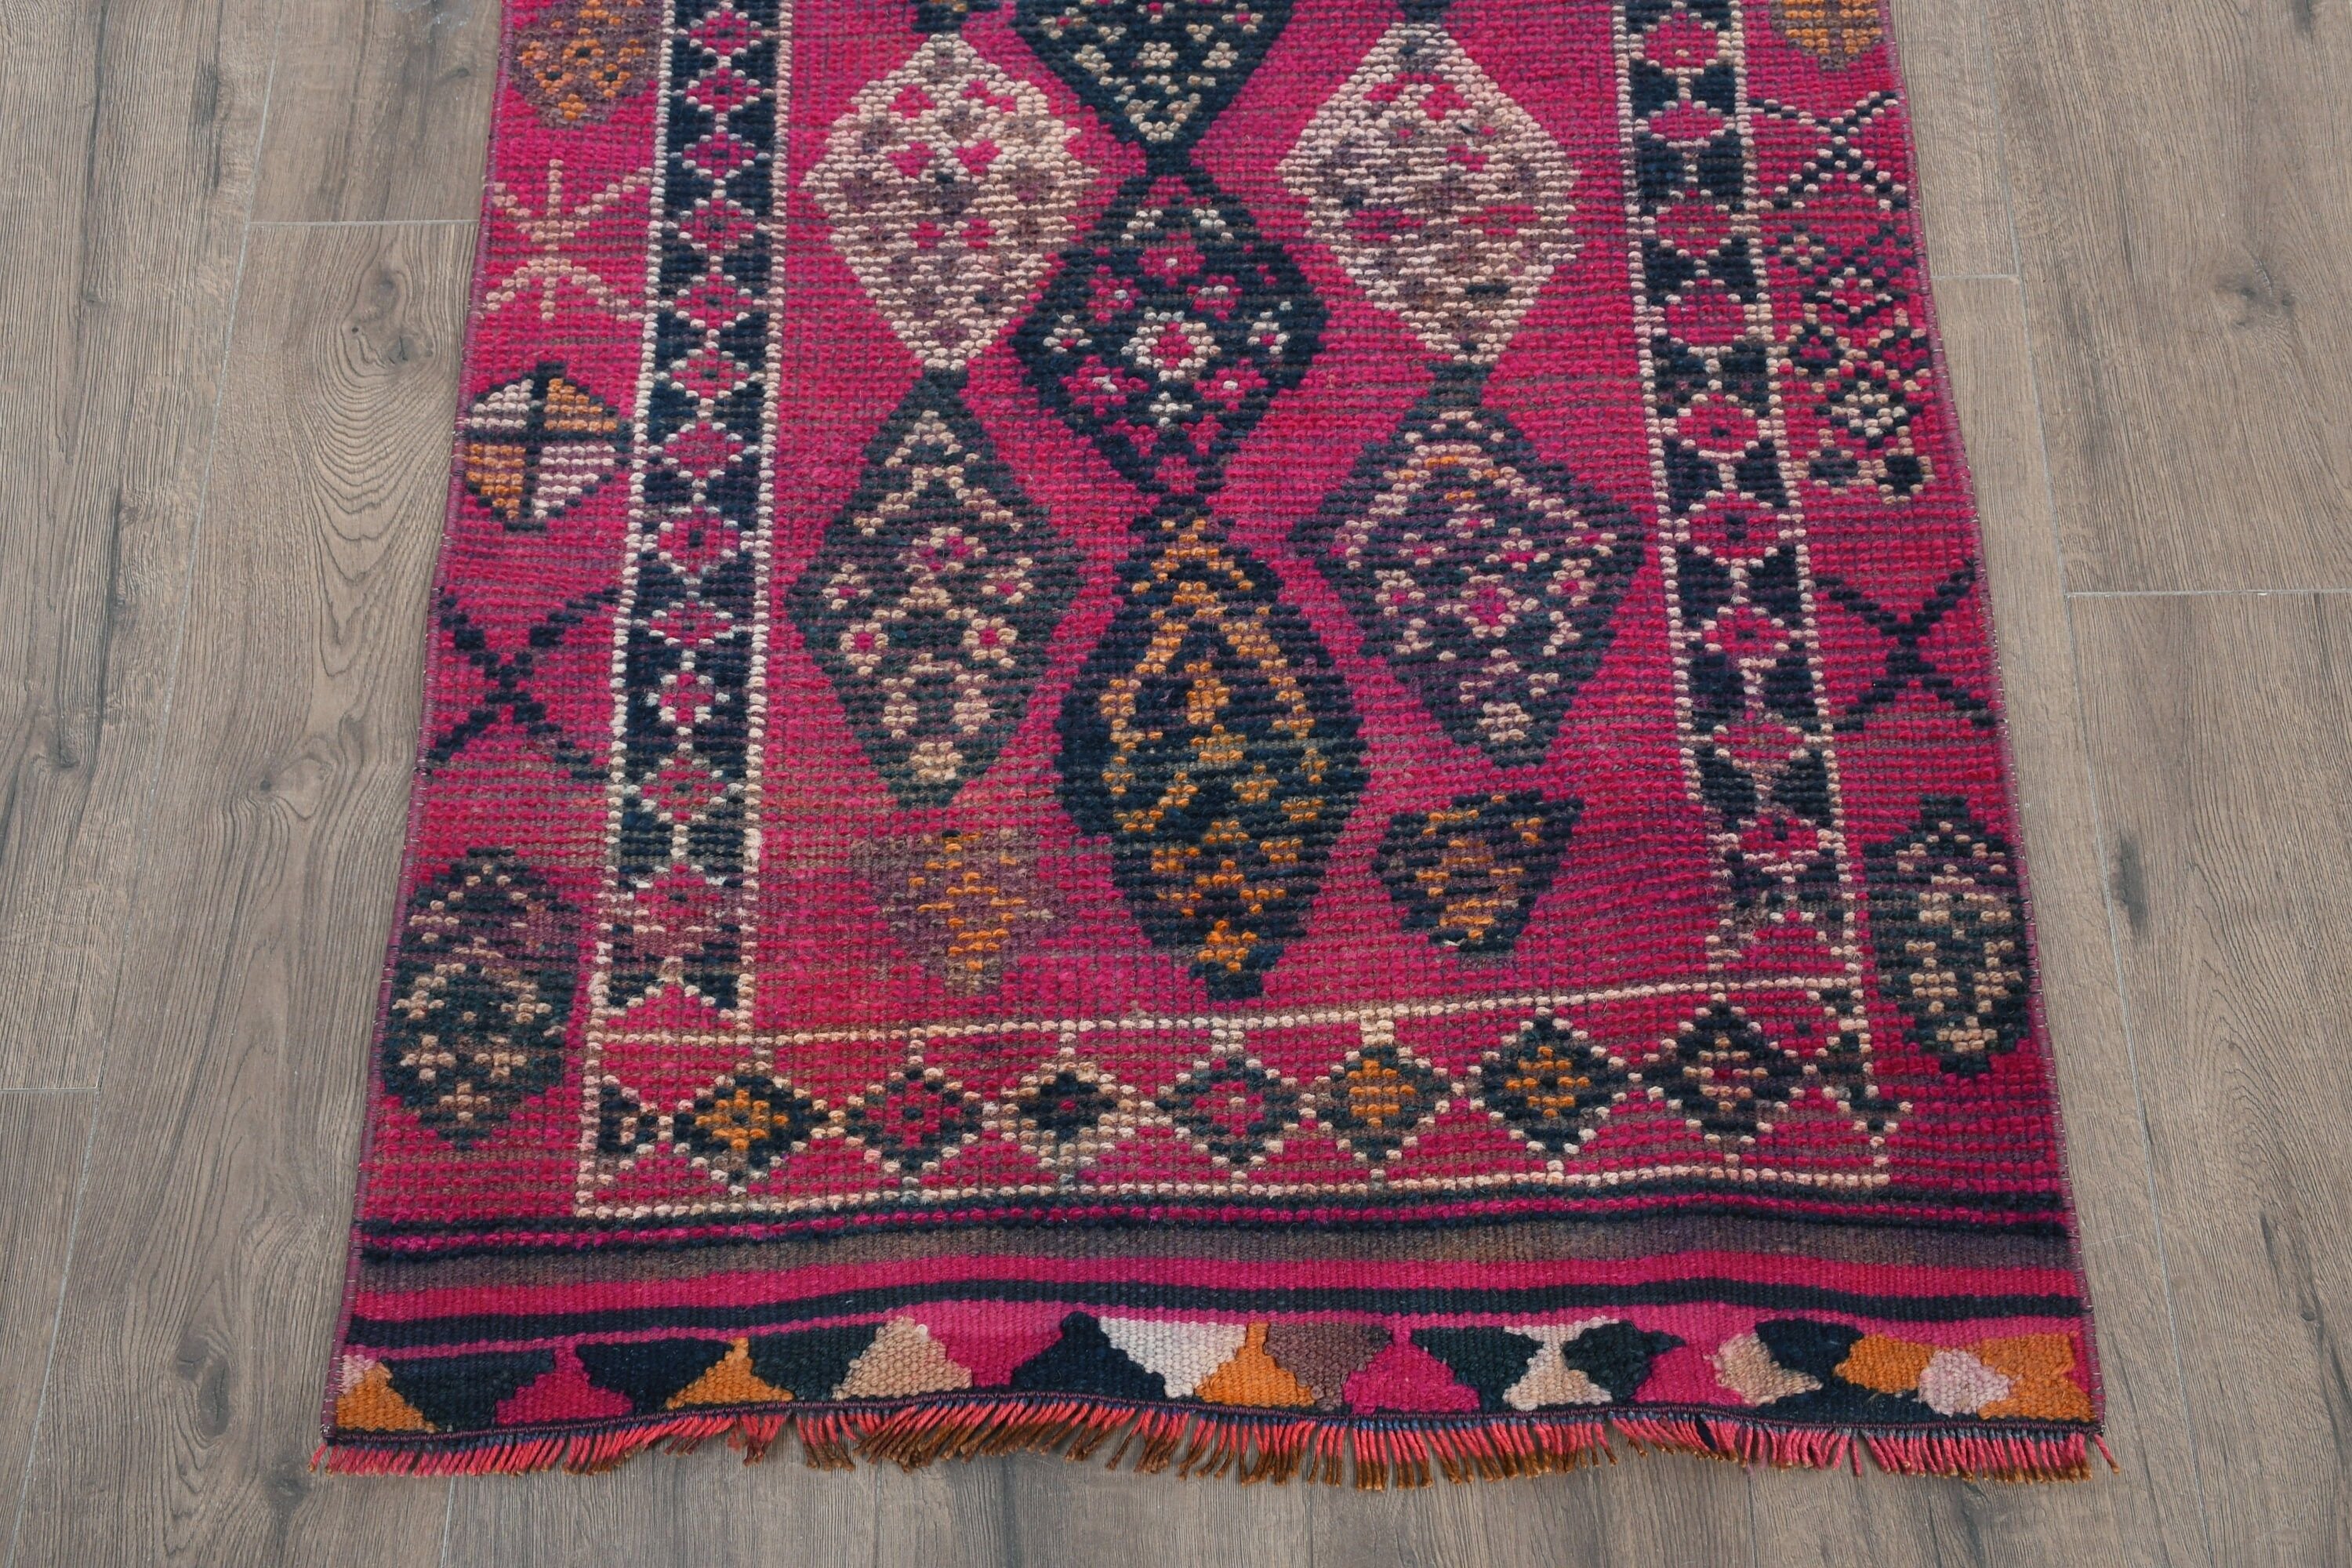 Pink Oushak Rug, Turkish Rug, Rugs for Kitchen, Home Decor Rug, Stair Rugs, Kitchen Rug, Vintage Rugs, 2.6x11 ft Runner Rugs